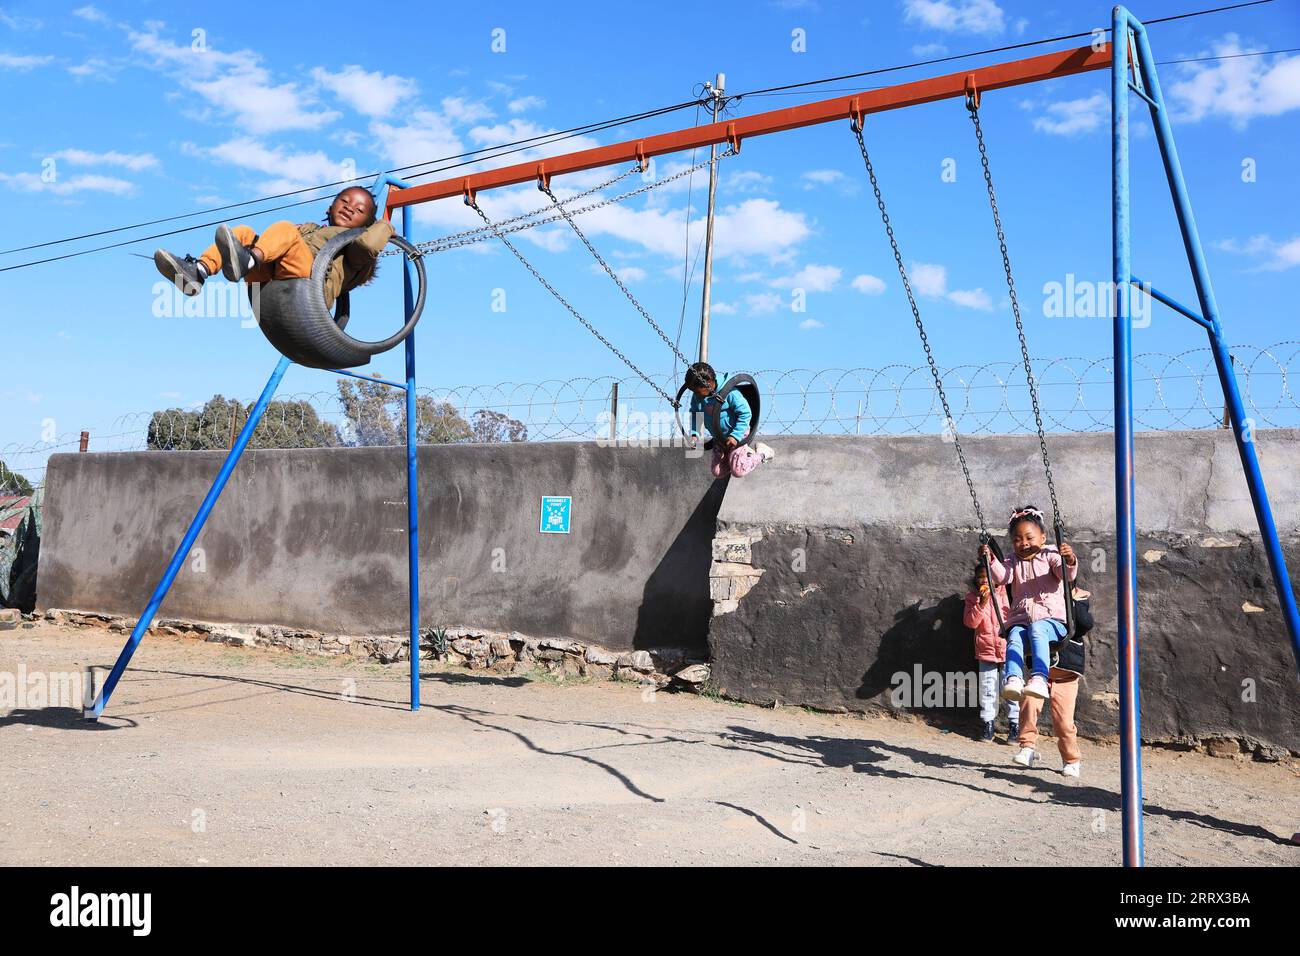 230817 -- CAPE TOWN, Aug. 17, 2023 -- Children play on swings at an early learning center in De Aar Town, more than 750 kilometers northeast of Cape Town, South Africa, on Aug. 11, 2023. This early learning center was funded by Longyuan South Africa Renewables of China Longyuan Power Group Corporation Limited, which has funded the establishment of four early learning centers in De Aar to provide education for children from poor families. Nearly 500 children in need have been admitted to these learning centers so far.  SOUTH AFRICA-DE AAR-CHINA-EARLY LEARNING CENTER DongxJianghui PUBLICATIONxNO Stock Photo